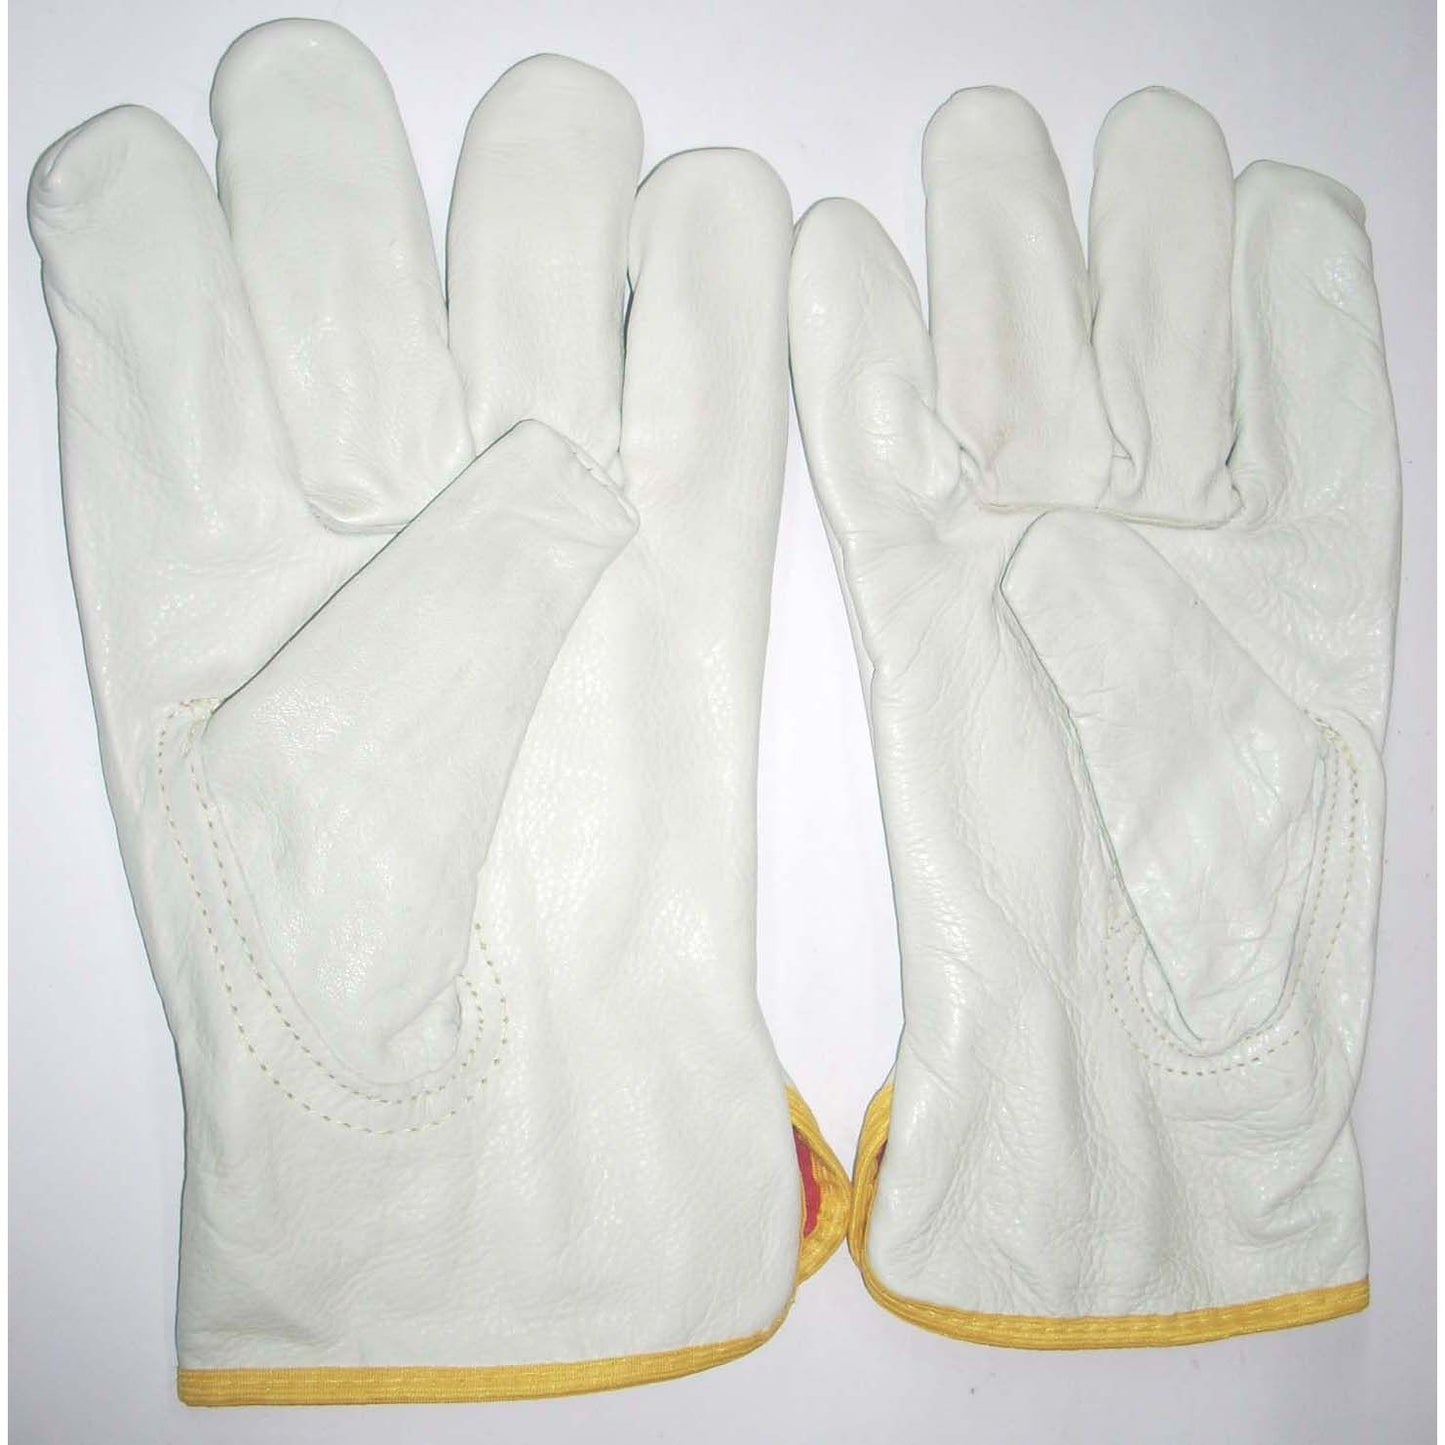 Southern Glove RLLDK2XL Cow Grain Leather Driver Gloves Red Fleece Lined Size 2XL